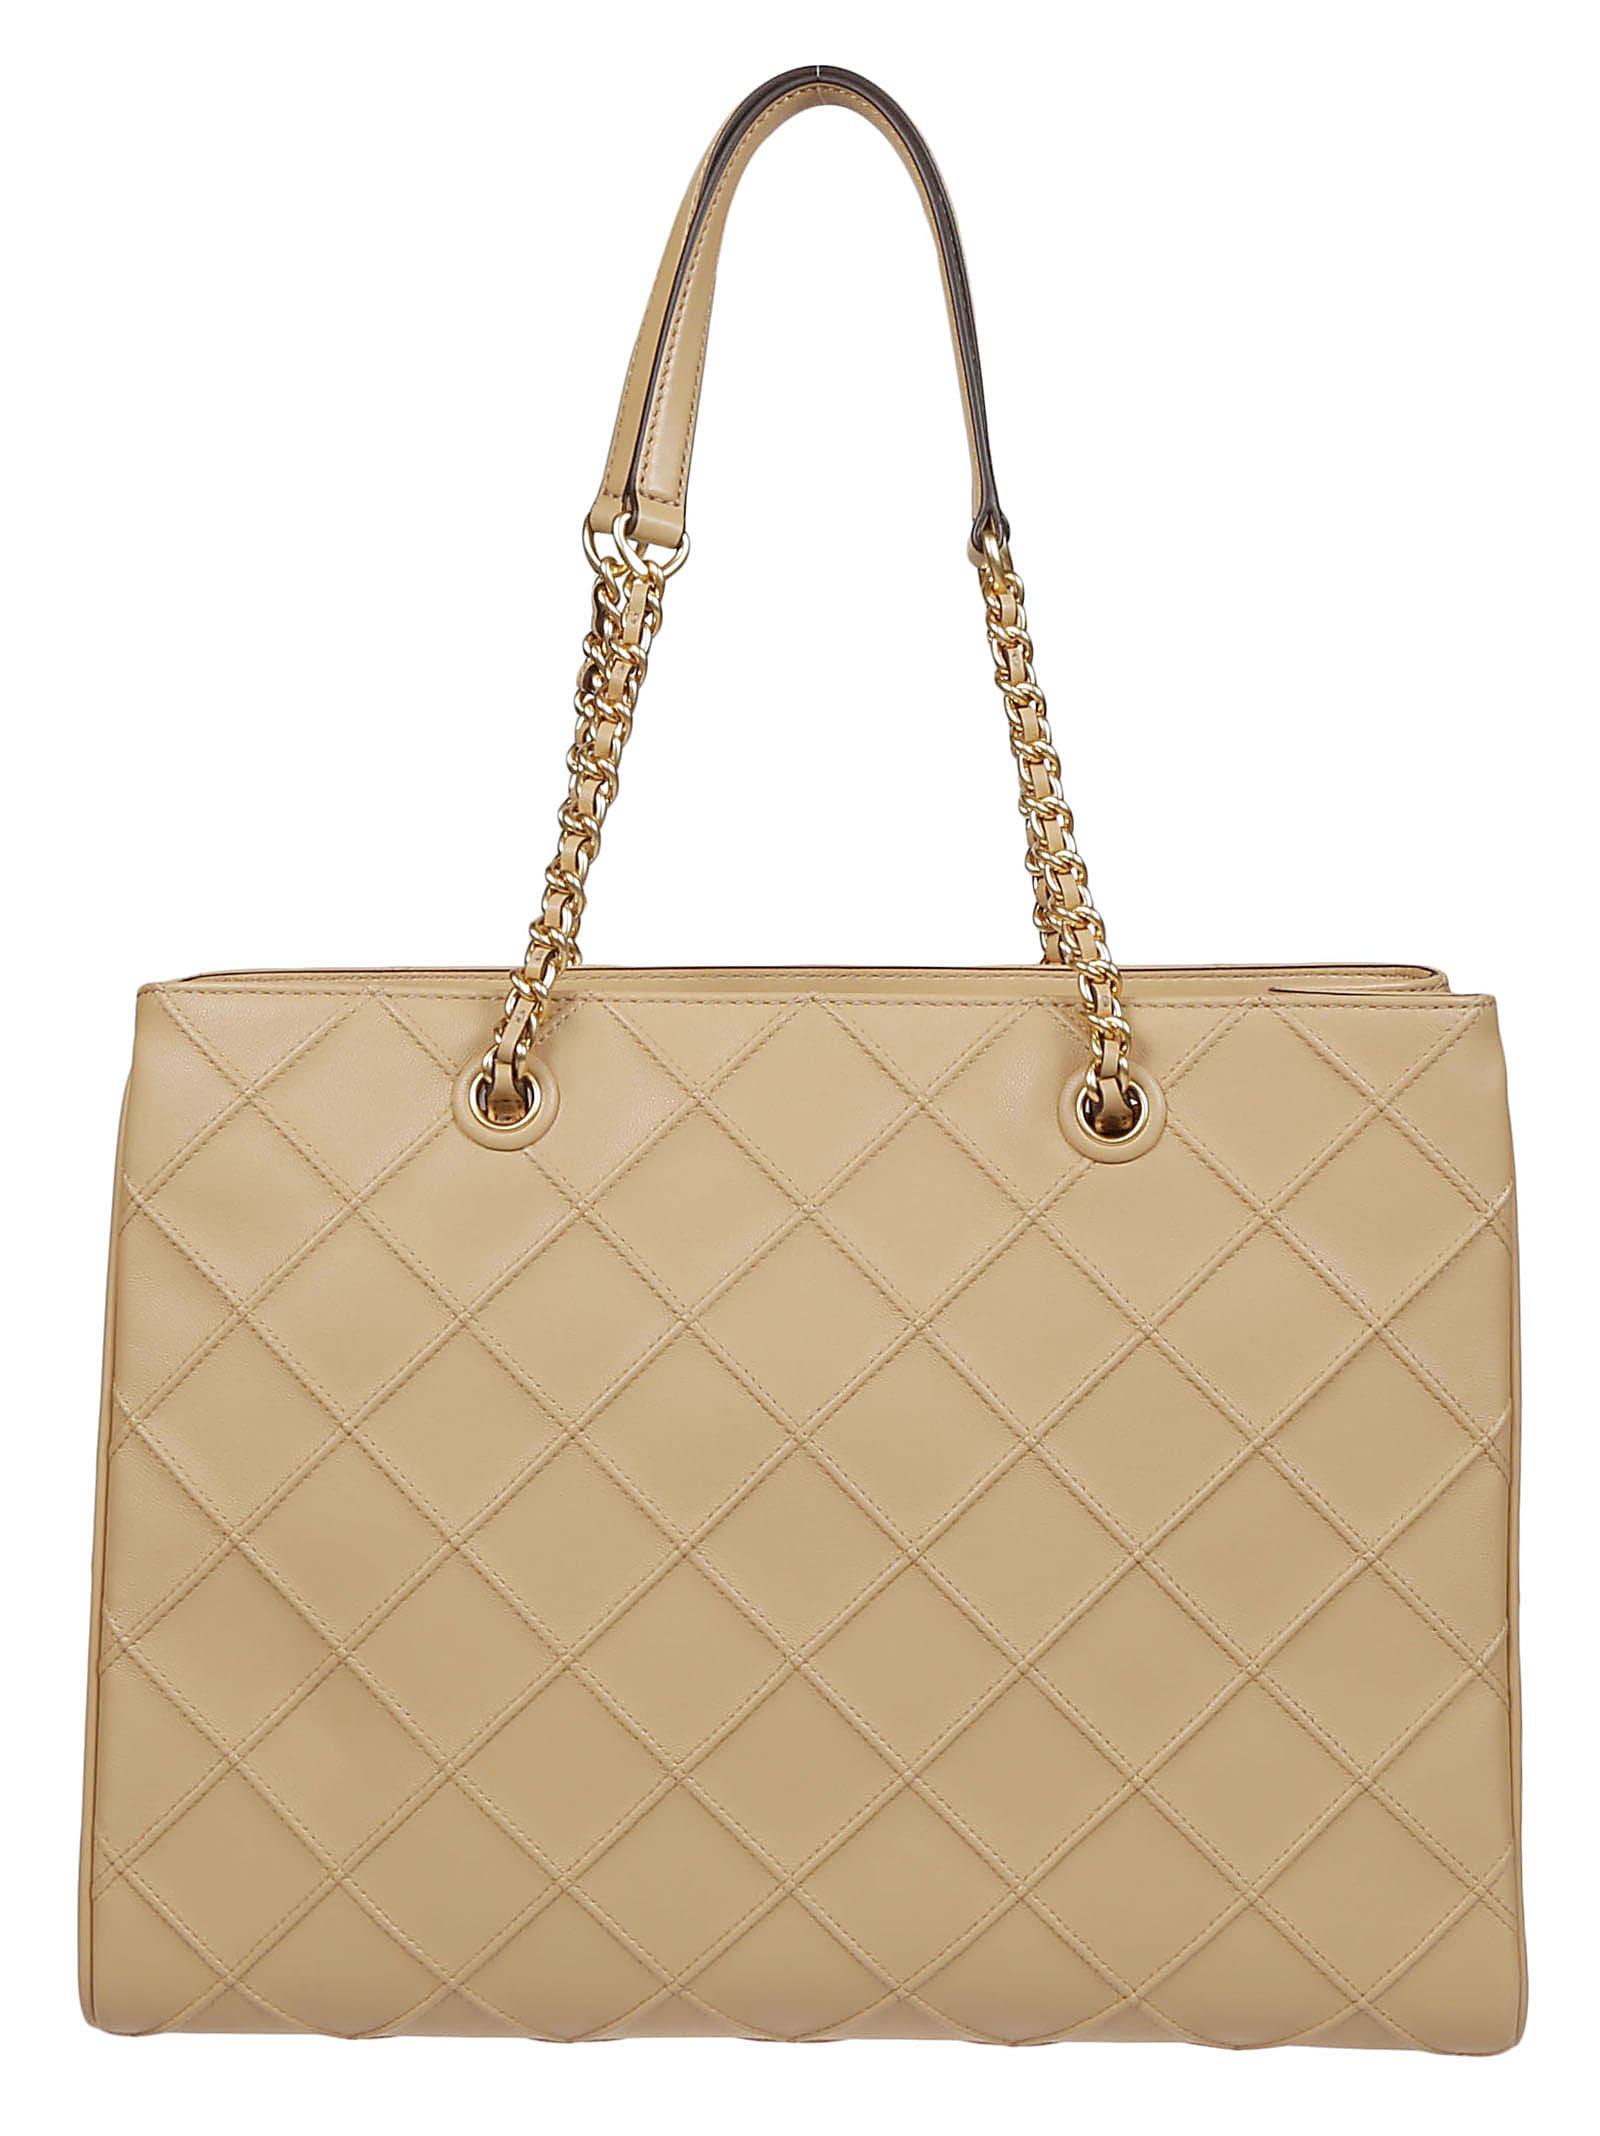 Tory Burch Fleming Soft Chain Tote Bag in Natural